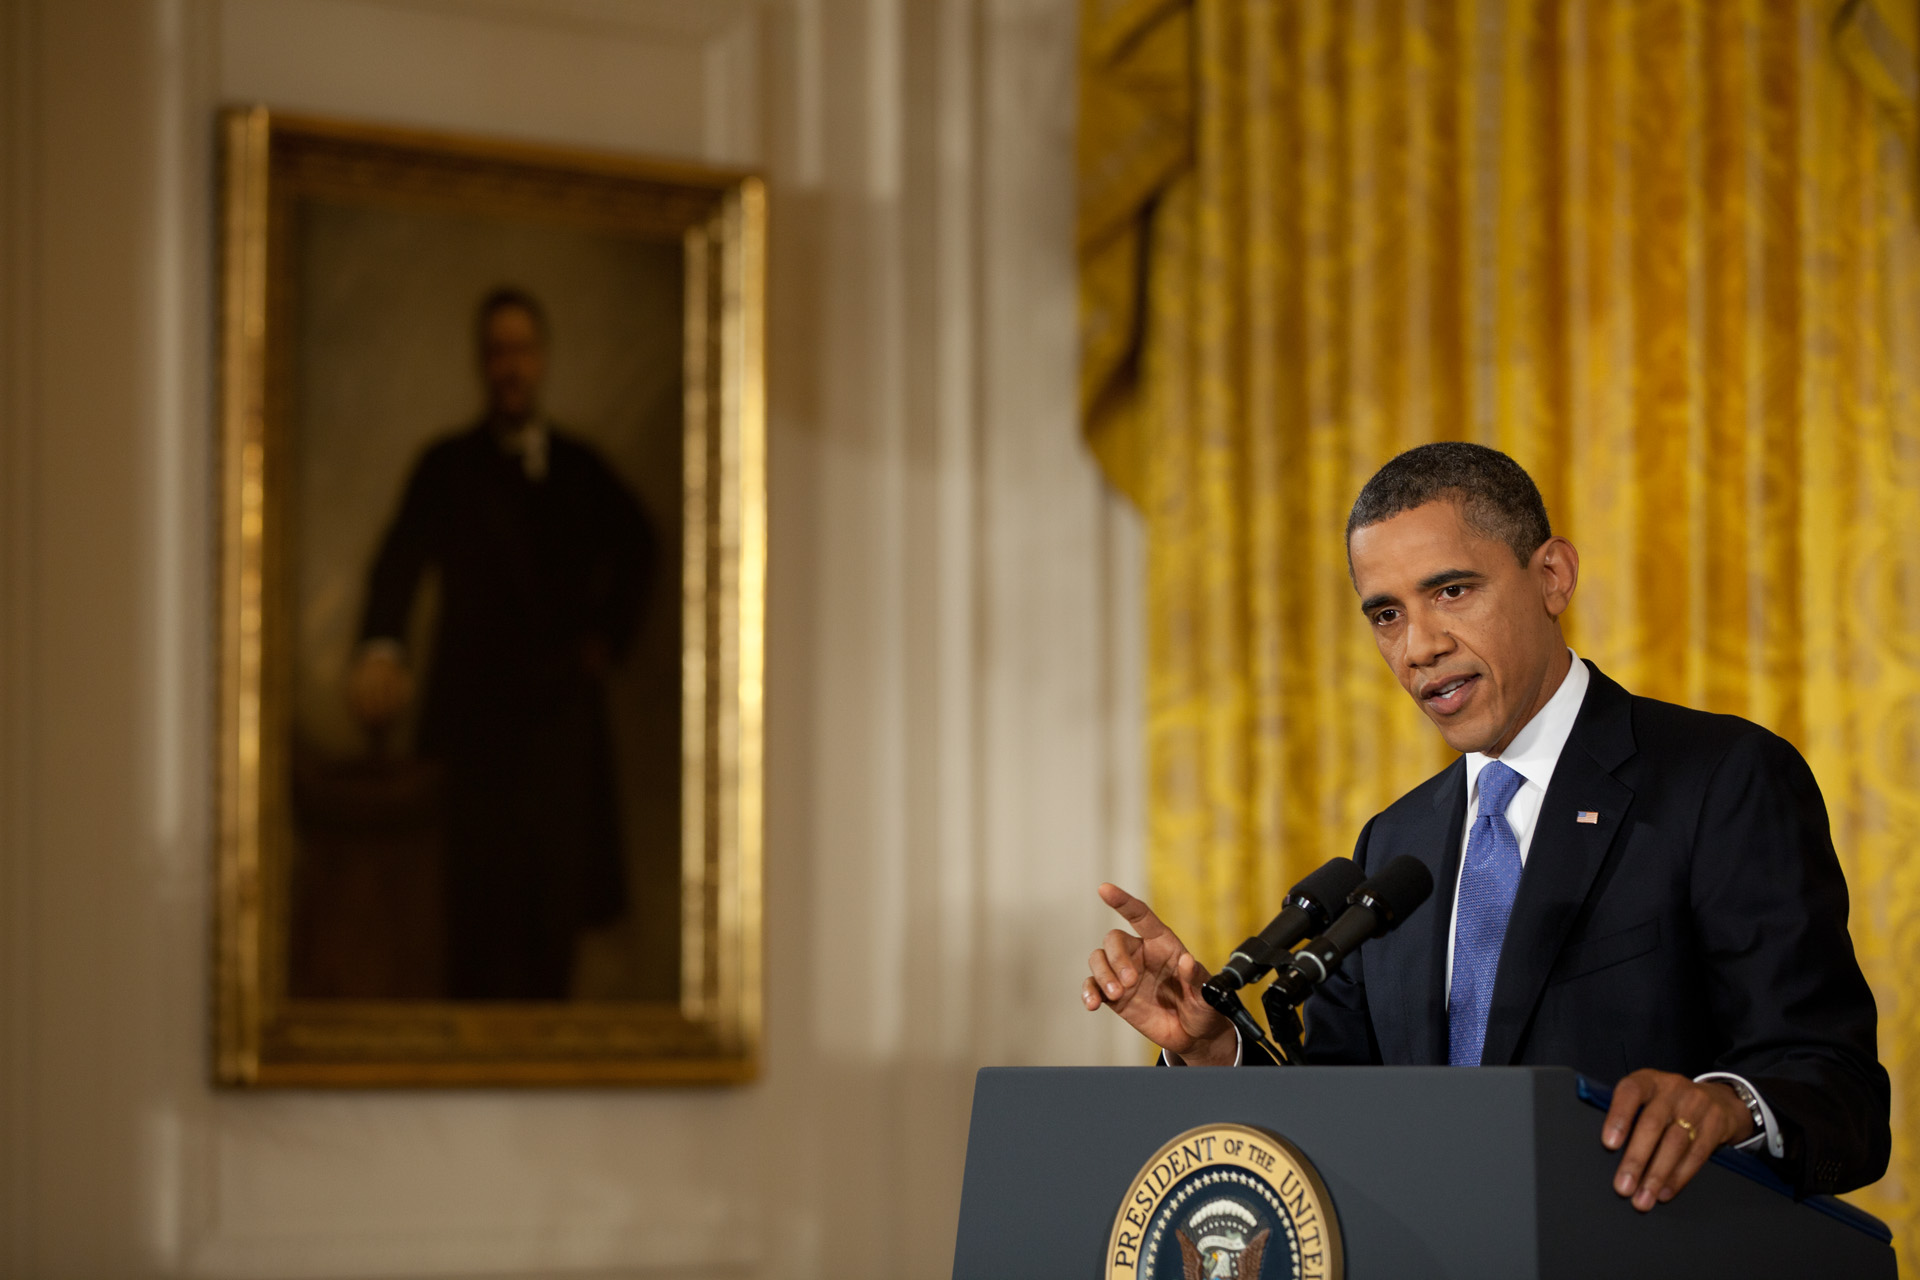 President Obama's News Conference on the American Jobs Act